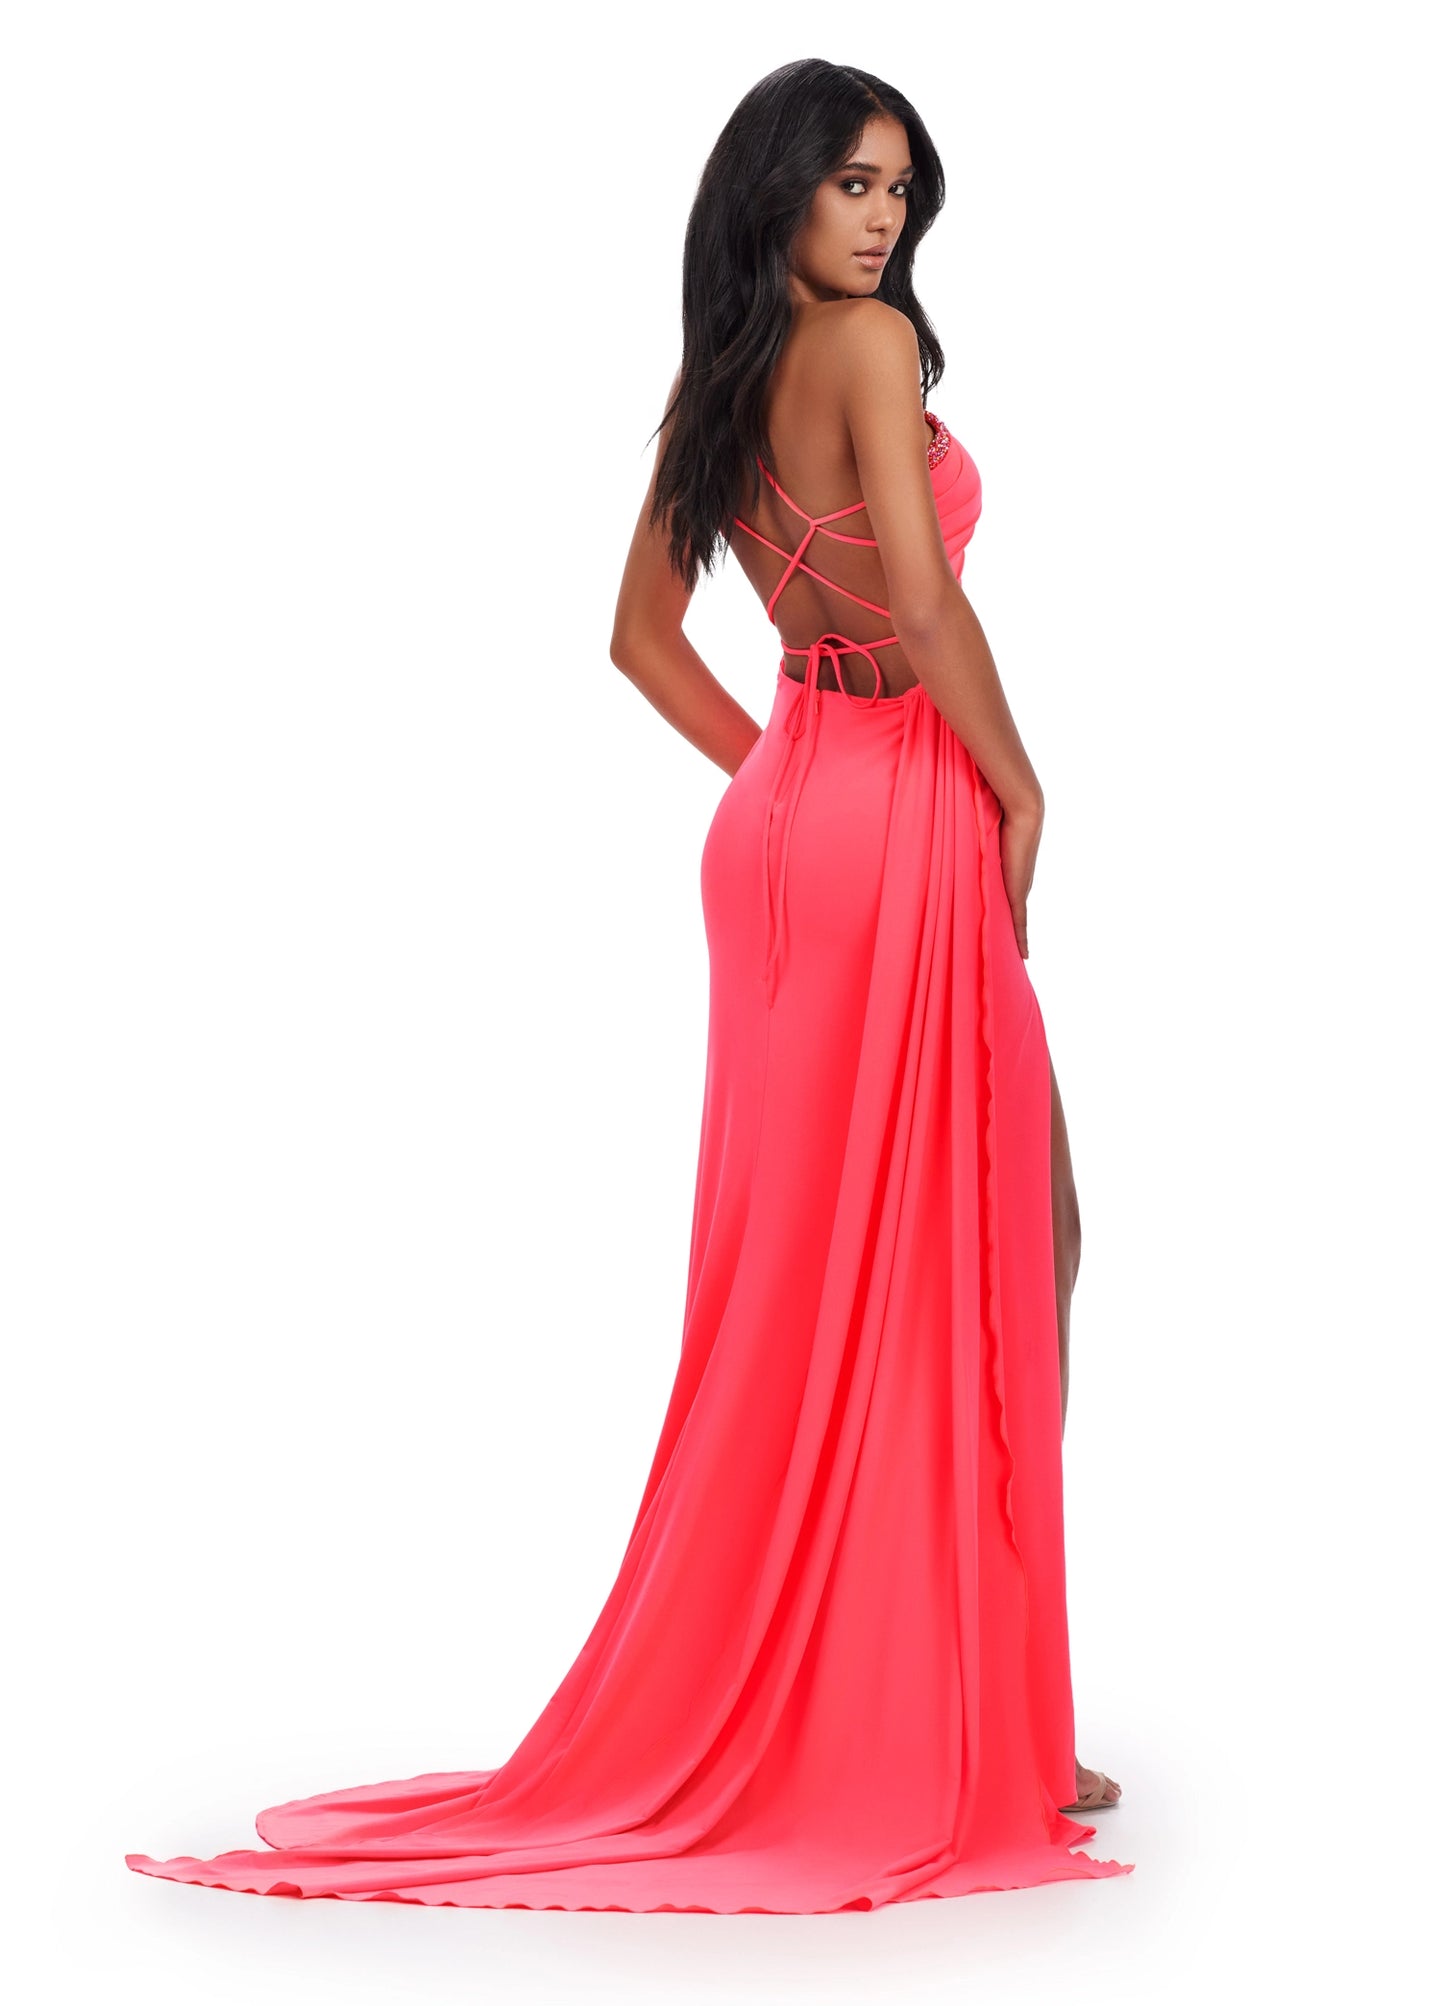 Look stunning at your next event with the Ashley Lauren 11539 long jersey one shoulder dress. This chic overskirt features a backless corset with a slit prom cut out and pageant detail. You will be sure to wow in this elegant evening gown. Be fabulously elegant in this one shoulder jersey gown. This dress features beaded details, cut outs and a lace up back complete with a side skirt for added drama.  COLORS: Coral, Lime, Black